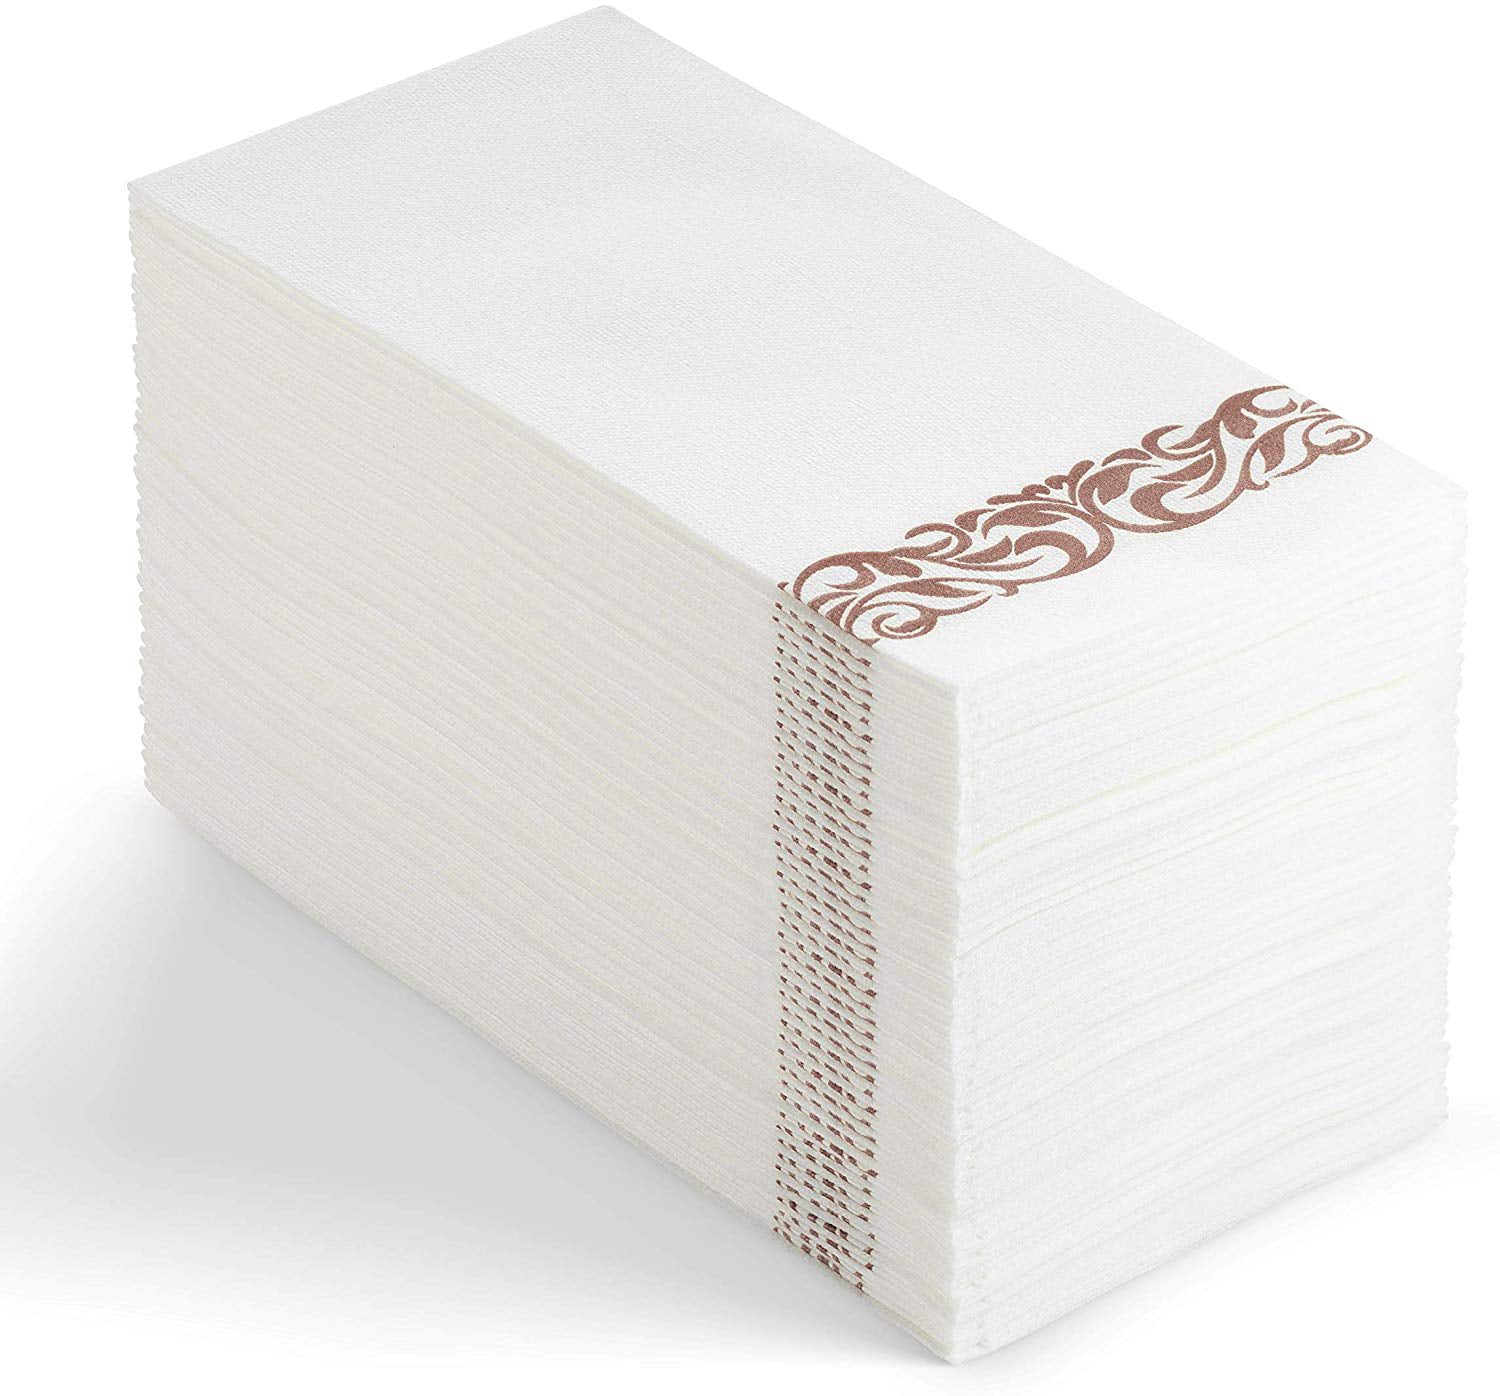 Disposable Hand Towels and Absorbent Linen-Feel Paper Guest Towels Napkins 500pc 